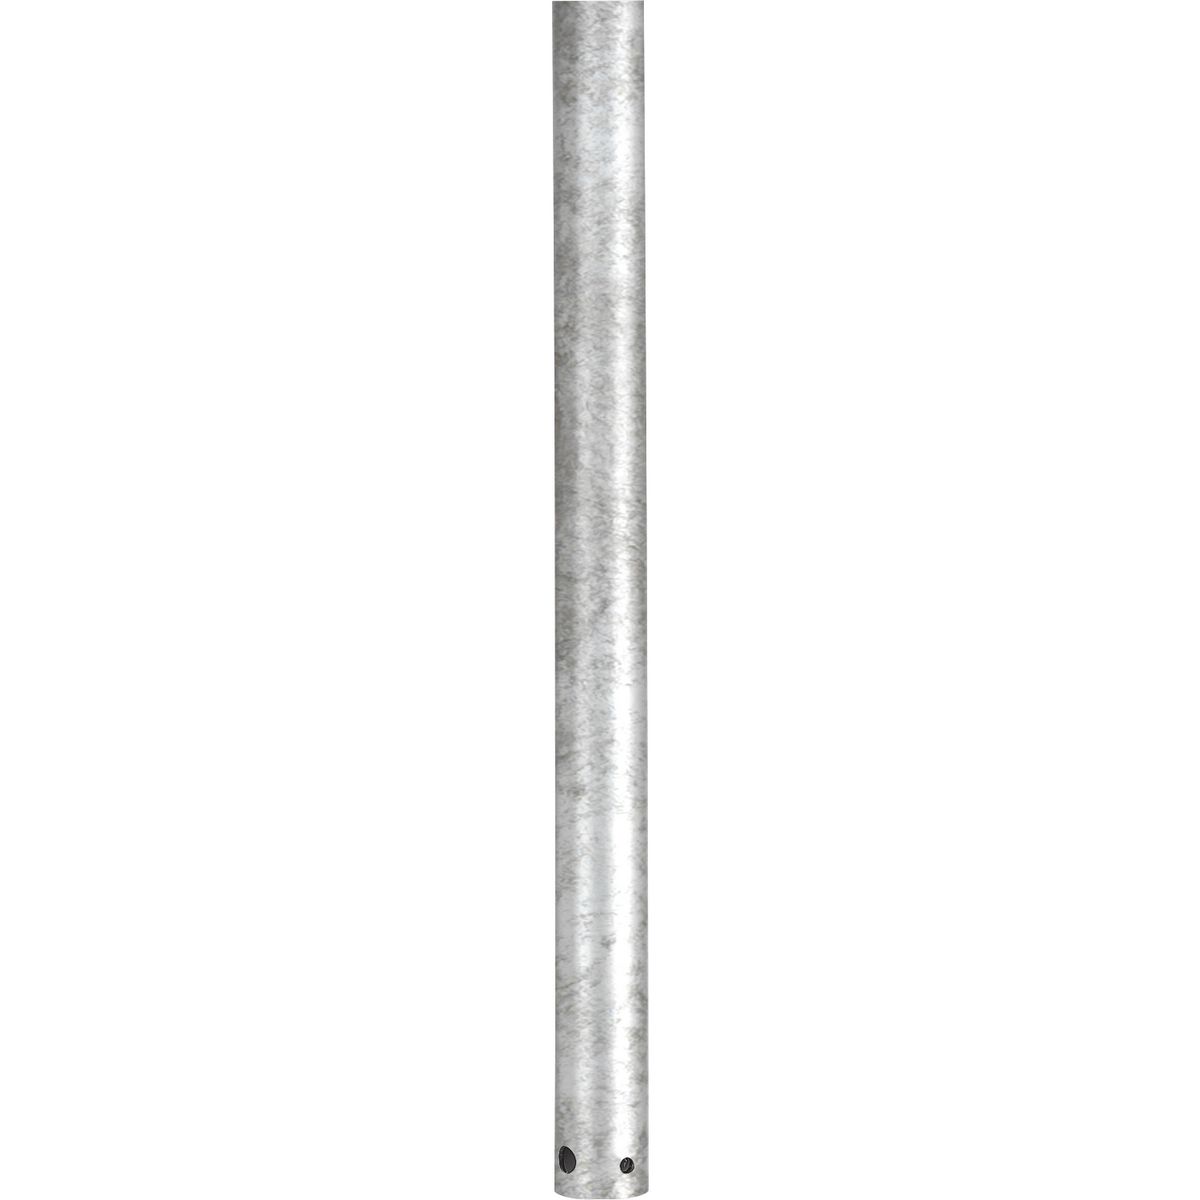 3/4 In. x 24 In. downrod for use with any Progress Lighting ceiling fan. Use of a fan downrod positions your ceiling fan at the optimal height for air circulation and provides the perfect solution for installation on high cathedral ceilings or in great rooms. Refer to the selection guide for recommended downrod lengths based upon your ceiling height. Galvanized Finish.